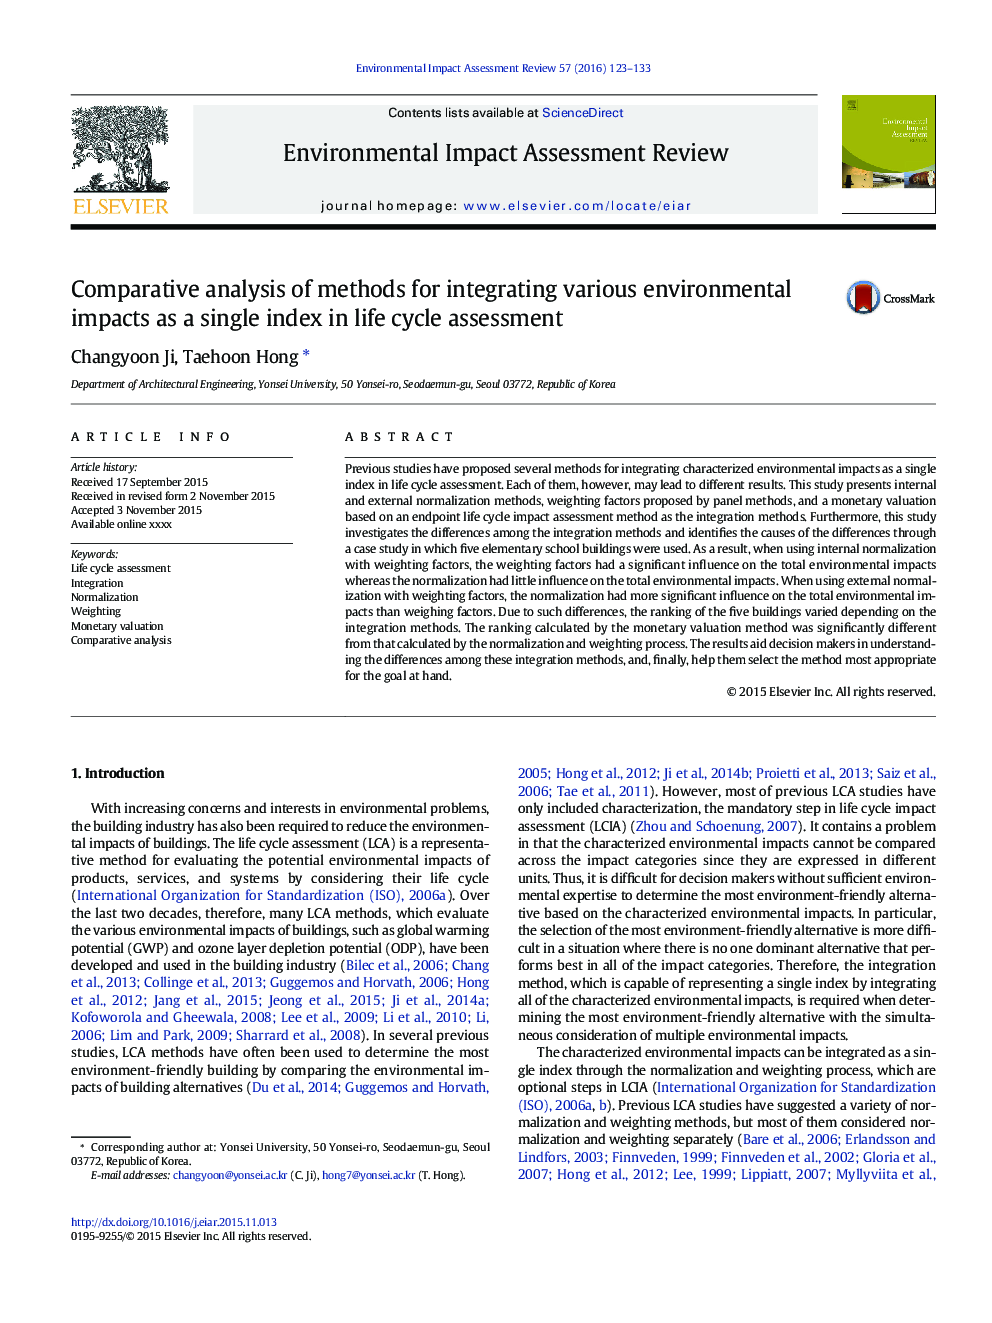 Comparative analysis of methods for integrating various environmental impacts as a single index in life cycle assessment